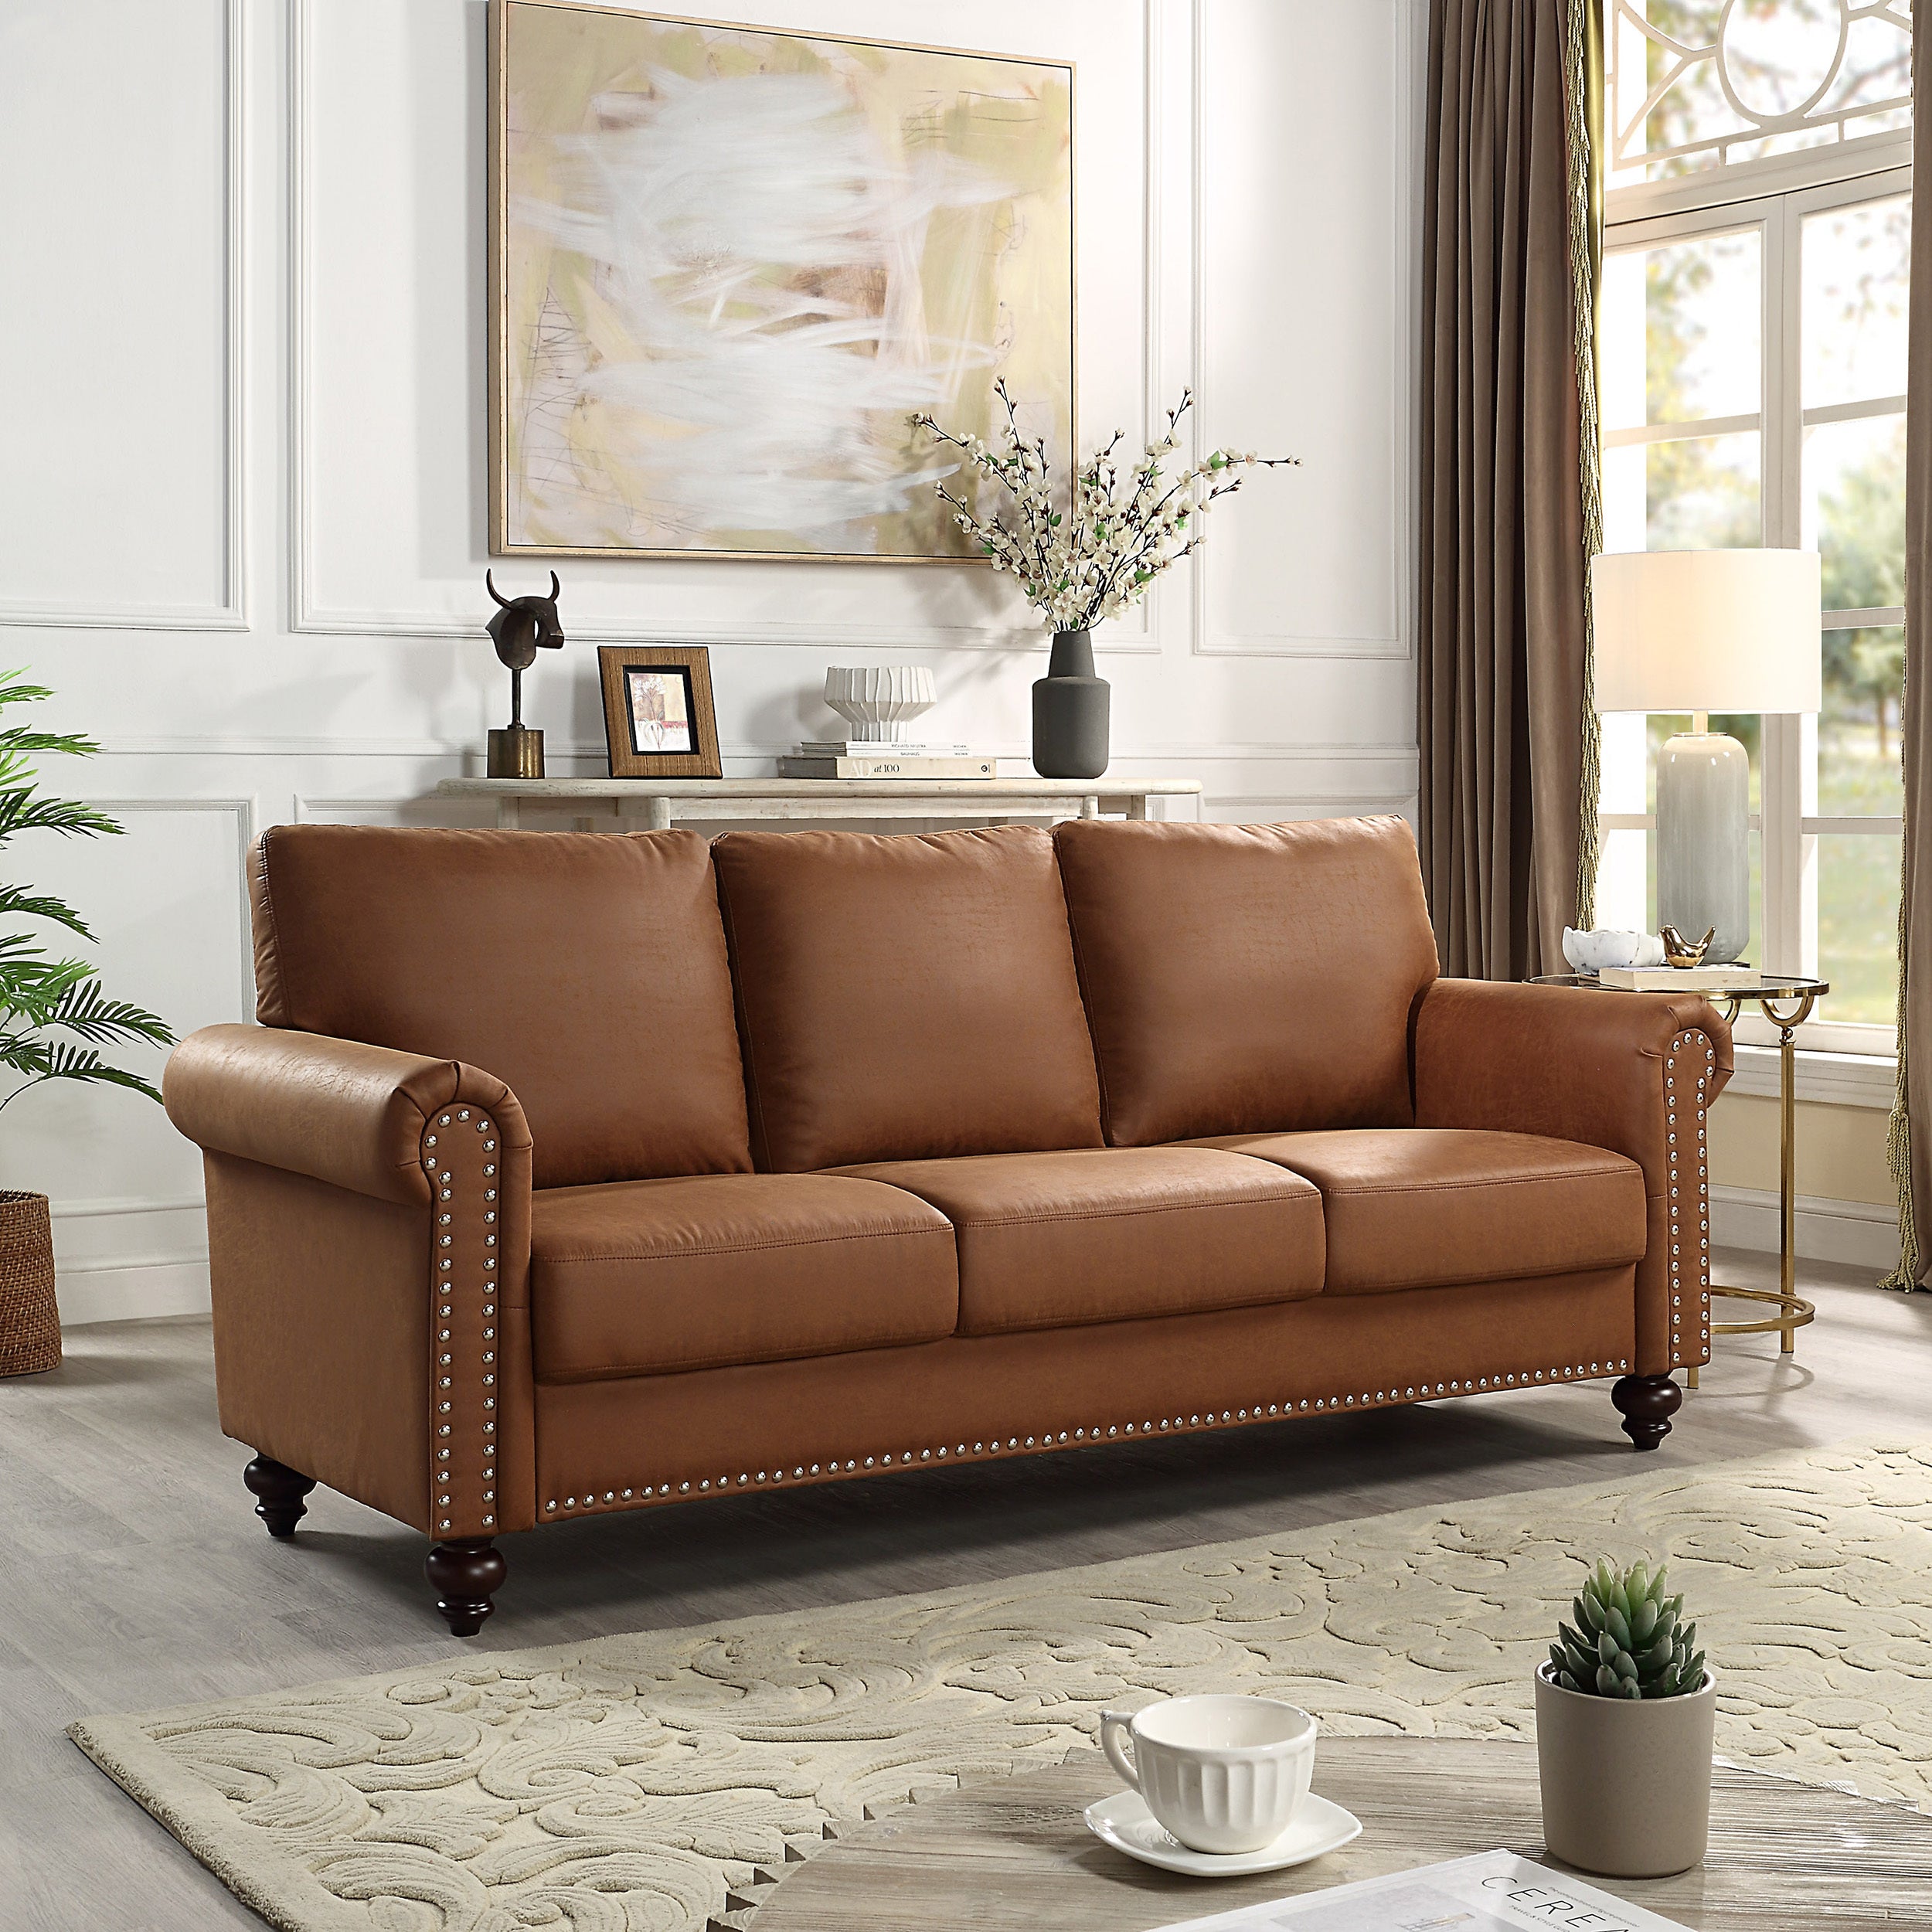 🆓🚛 80" 3 Seater Faux Leather Upholstery Sofa, with Rolled Arm and Nailhead Trim, Light Brown